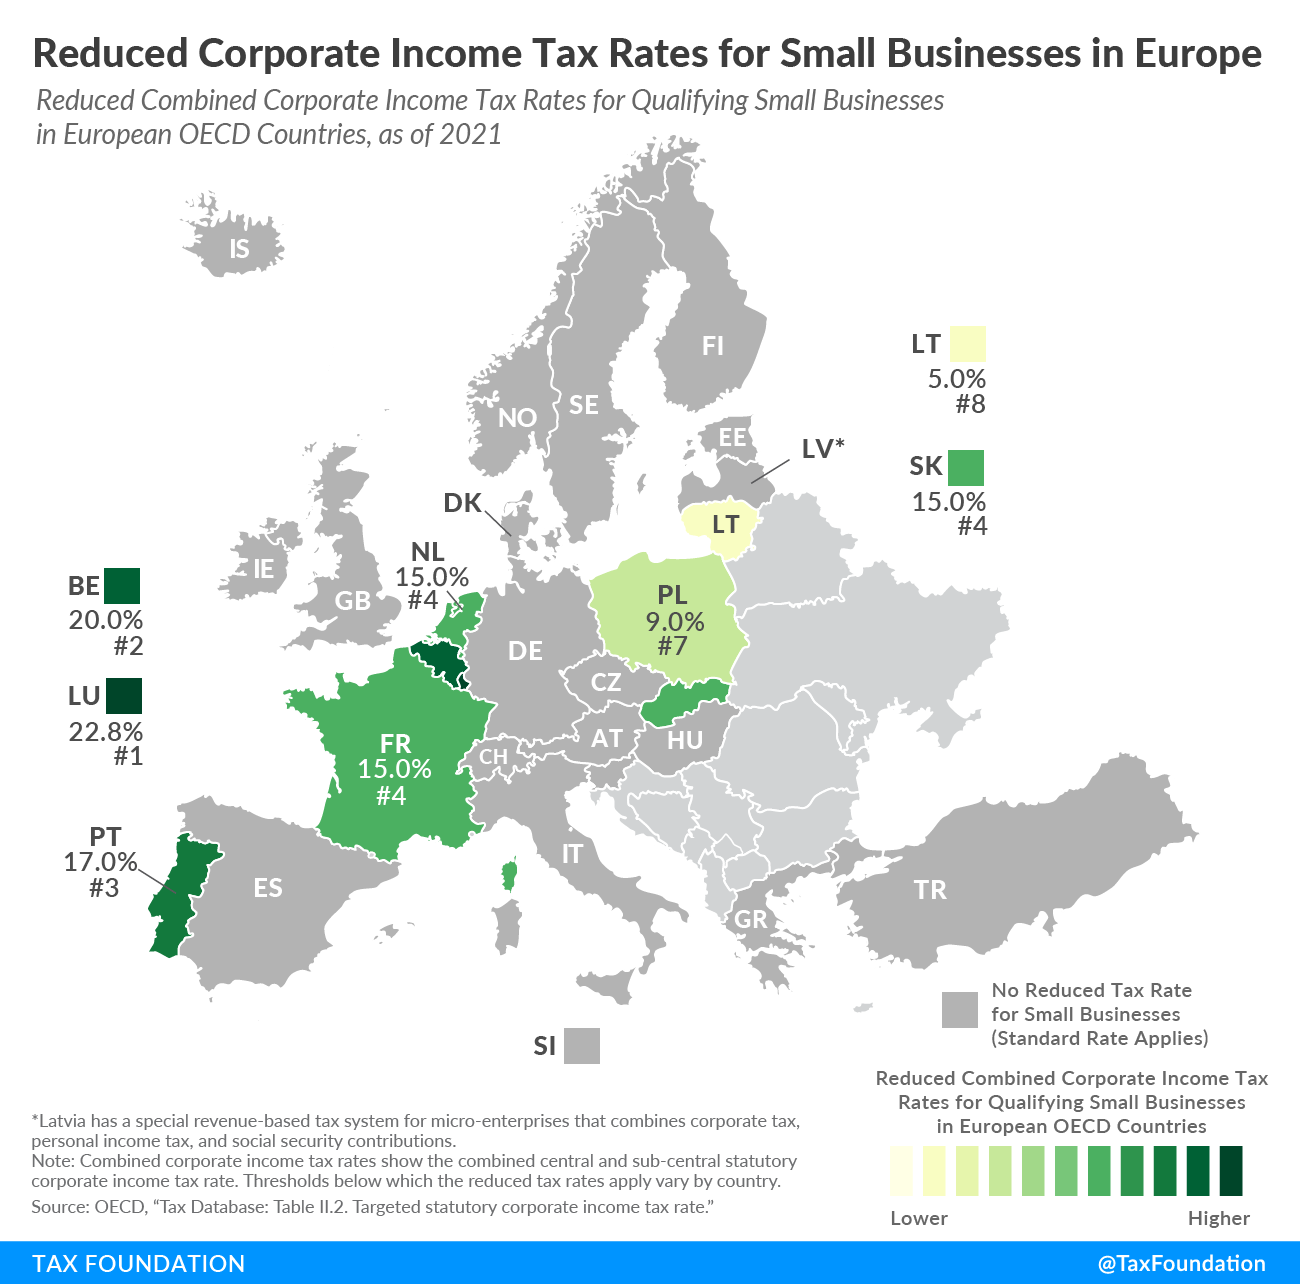 Reduced Corporate Income Tax Rates for Small Businesses in Europe 2021